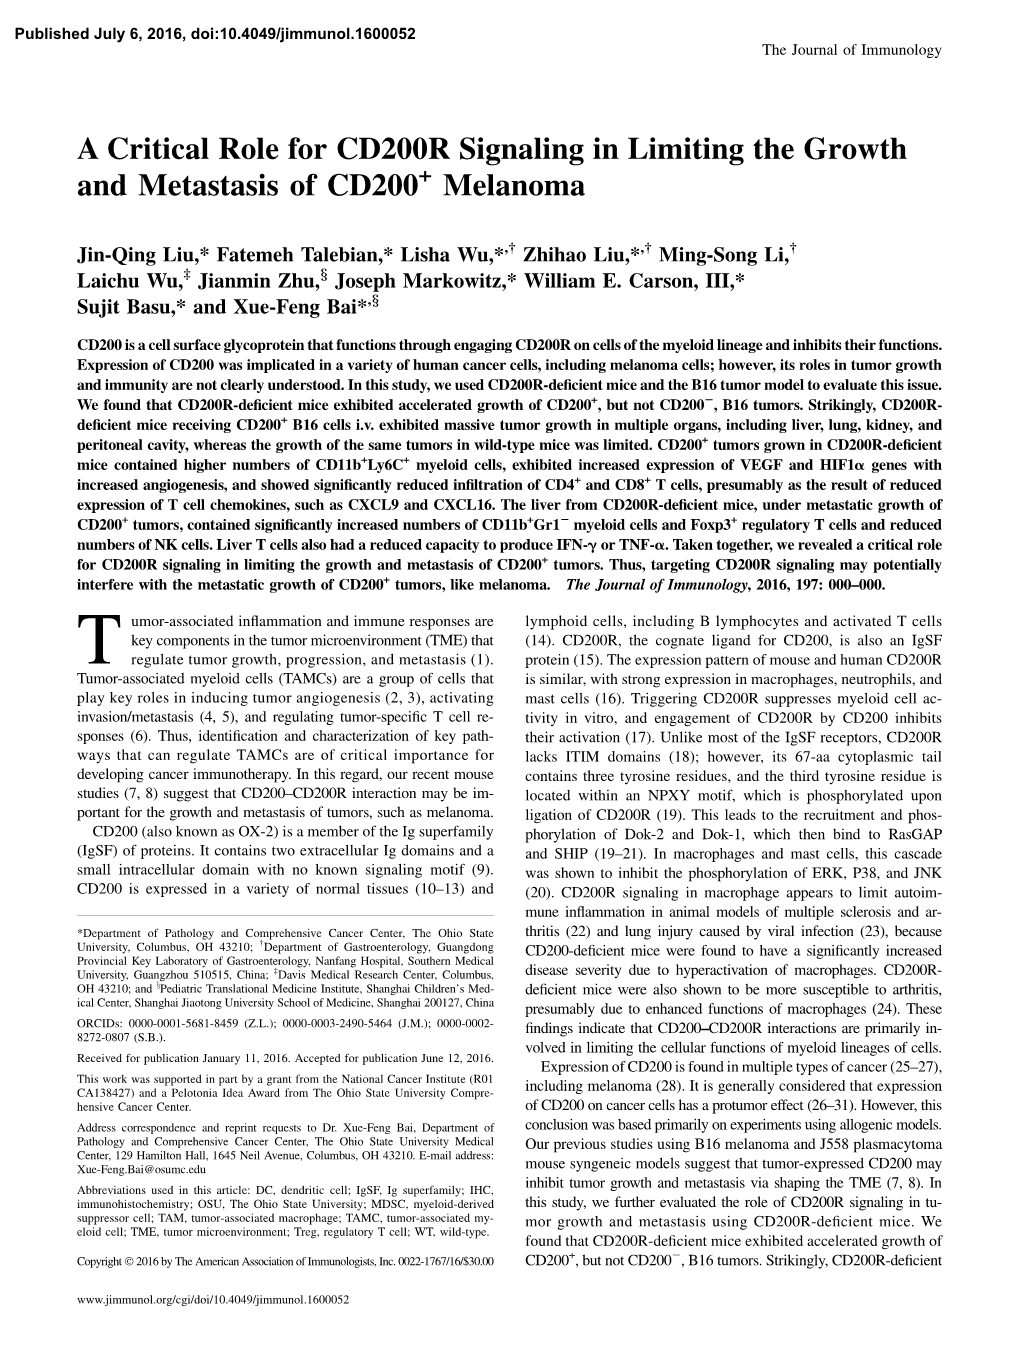 A Critical Role for CD200R Signaling in Limiting the Growth and Metastasis of CD200+ Melanoma